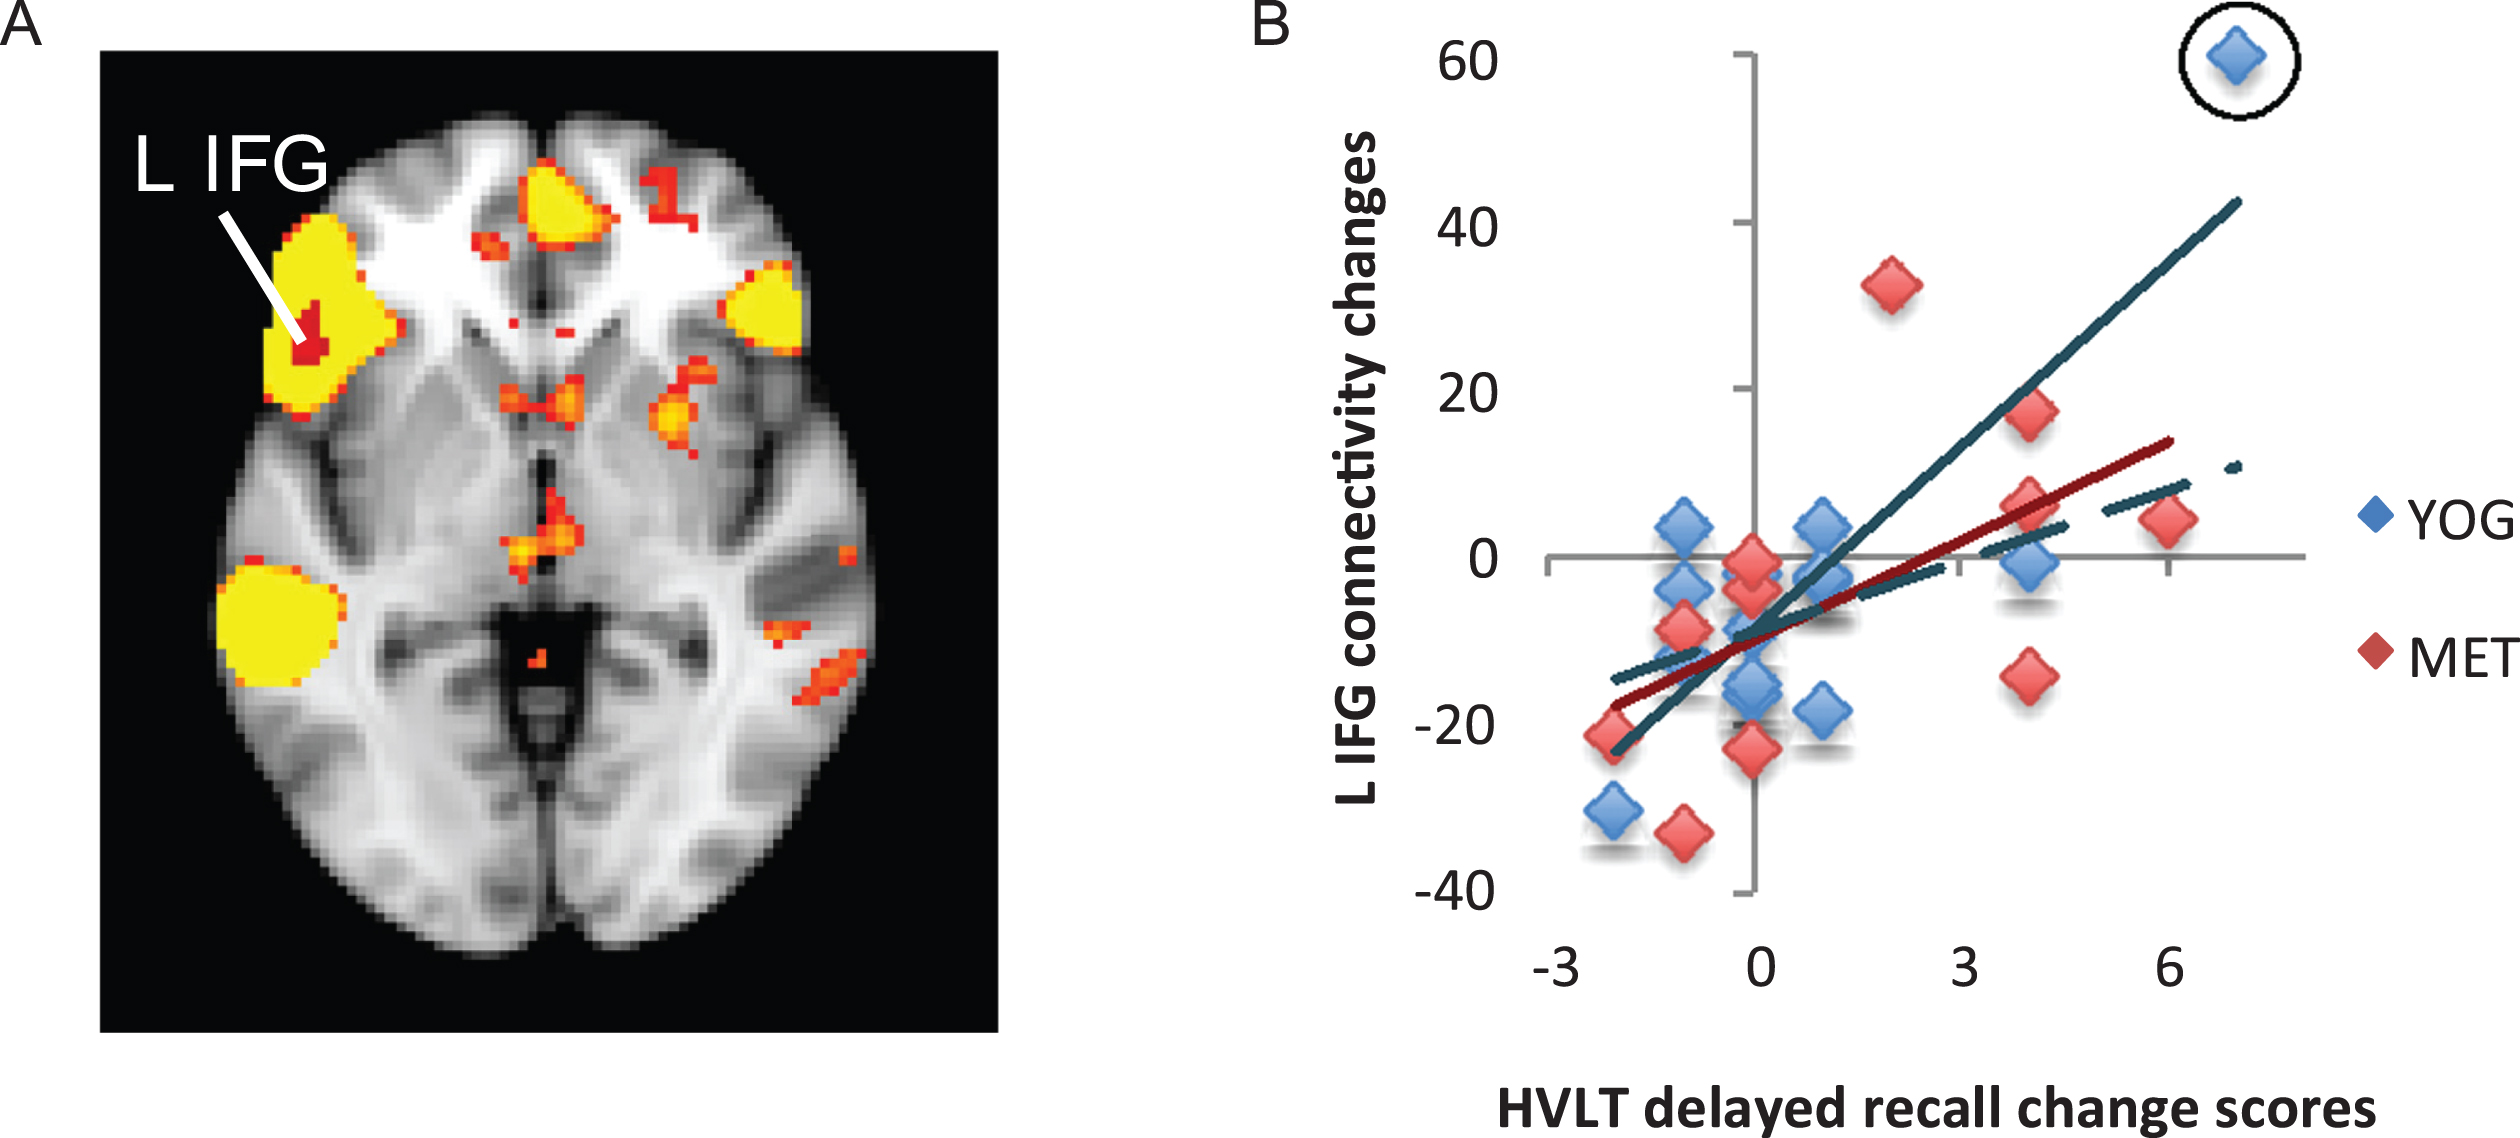 Changes in functional connectivity within the language network correlated with improved verbal memory. A) The language resting-state network is displayed in yellow on a template brain in neurological orientation. A single region in the left inferior frontal gyrus (L IFG) showed a significant positive correlation between changes in language-network connectivity and improved verbal memory measured with the Hopkins Verbal Learning Test (HVLT). This region is displayed in red (z <  2.3, p <  0.05, corrected). B) A scatter figure displays the positive correlation for the L IFG cluster shown in A for yoga (YOG, blue) and memory enhancement training (MET, red) groups. Trendlines are displayed for each group, including a dashed line for a trendline with an outlier (circled in black) removed for the yoga group.